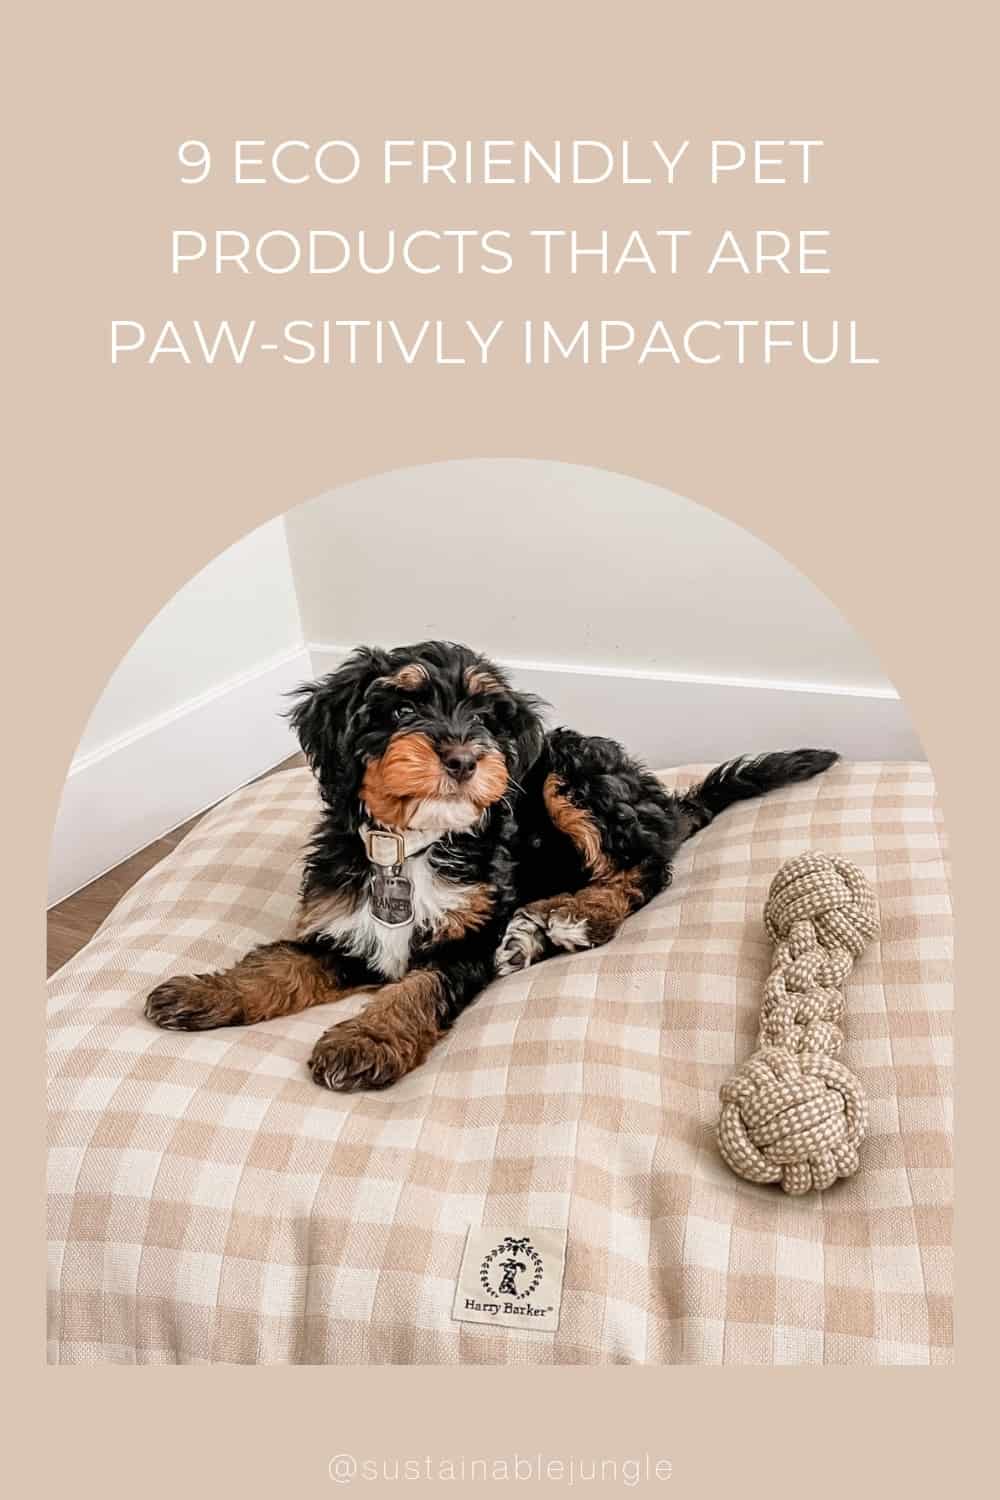 9 Eco Friendly Pet Products That Are Paw-sitivly Impactful #ecofriendlypetproducts #bestecofriendlypetproducts #ecofriendlypetcleaningproducts #ecofriendlypetproductbrands #sustainablepetproducts #bestsustainablepetproducts #sustainabledogproducts #ecofriendlydogproducts #sustainablejungle Image by Harry Barker